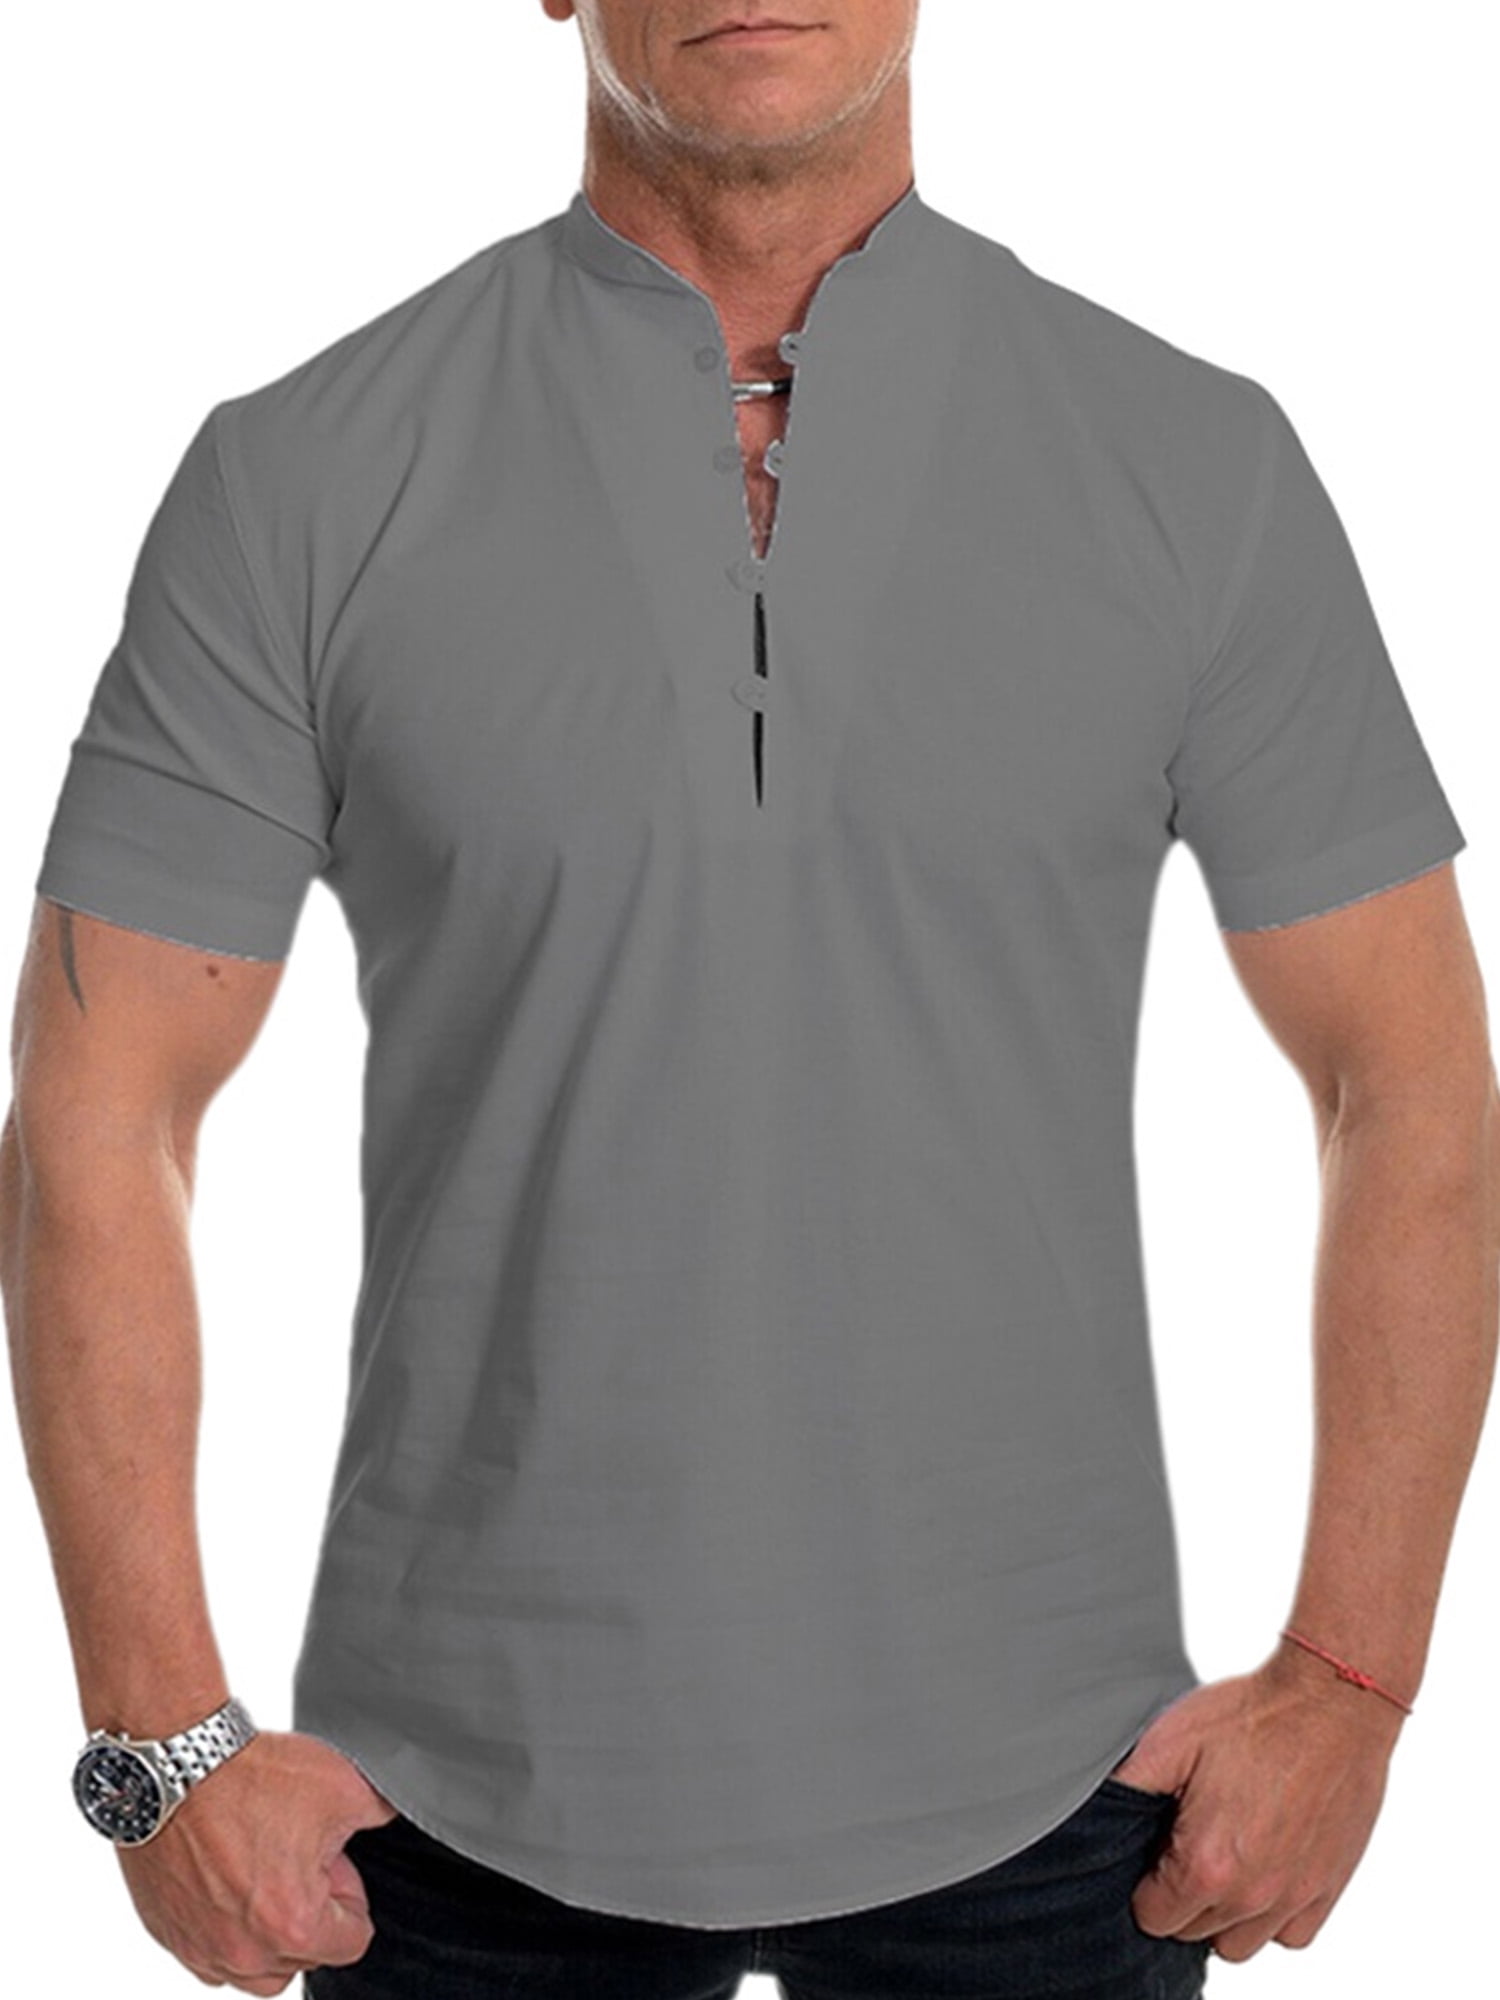 Mens Casual Slim Fit Short Sleeve Polo Shirt Bodybuilding Muscle Fitness Tee Tops 